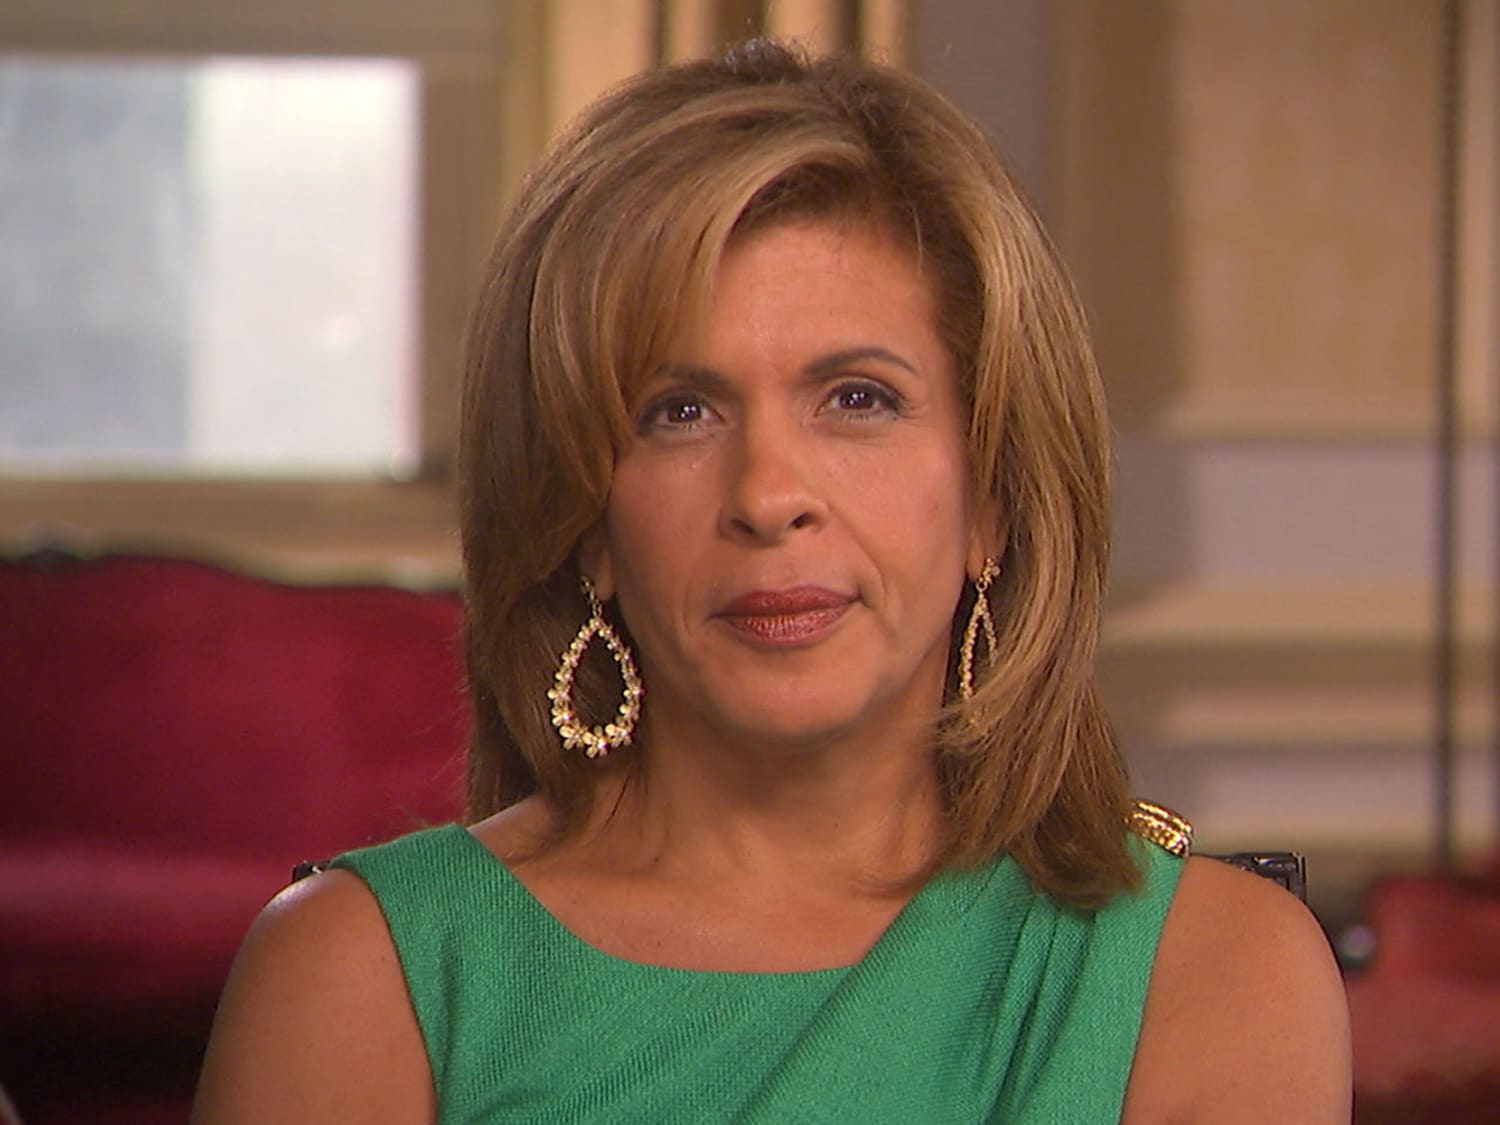 Hoda Kotb recalls the steep learning curve working at 'Dateline